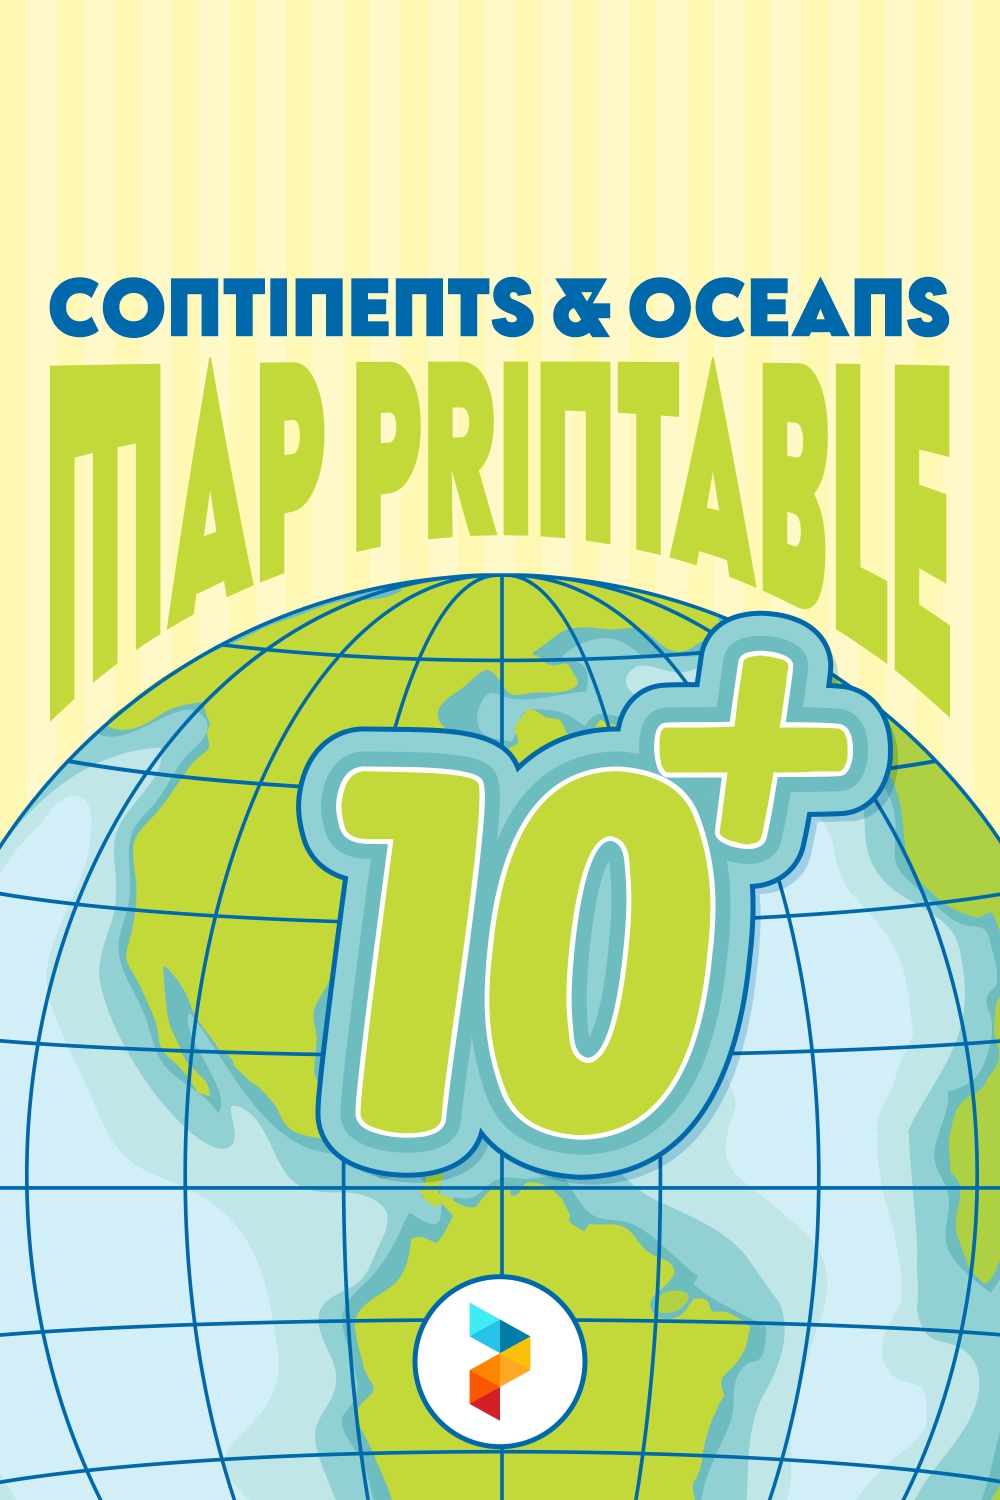 Continents And Oceans Map Printable